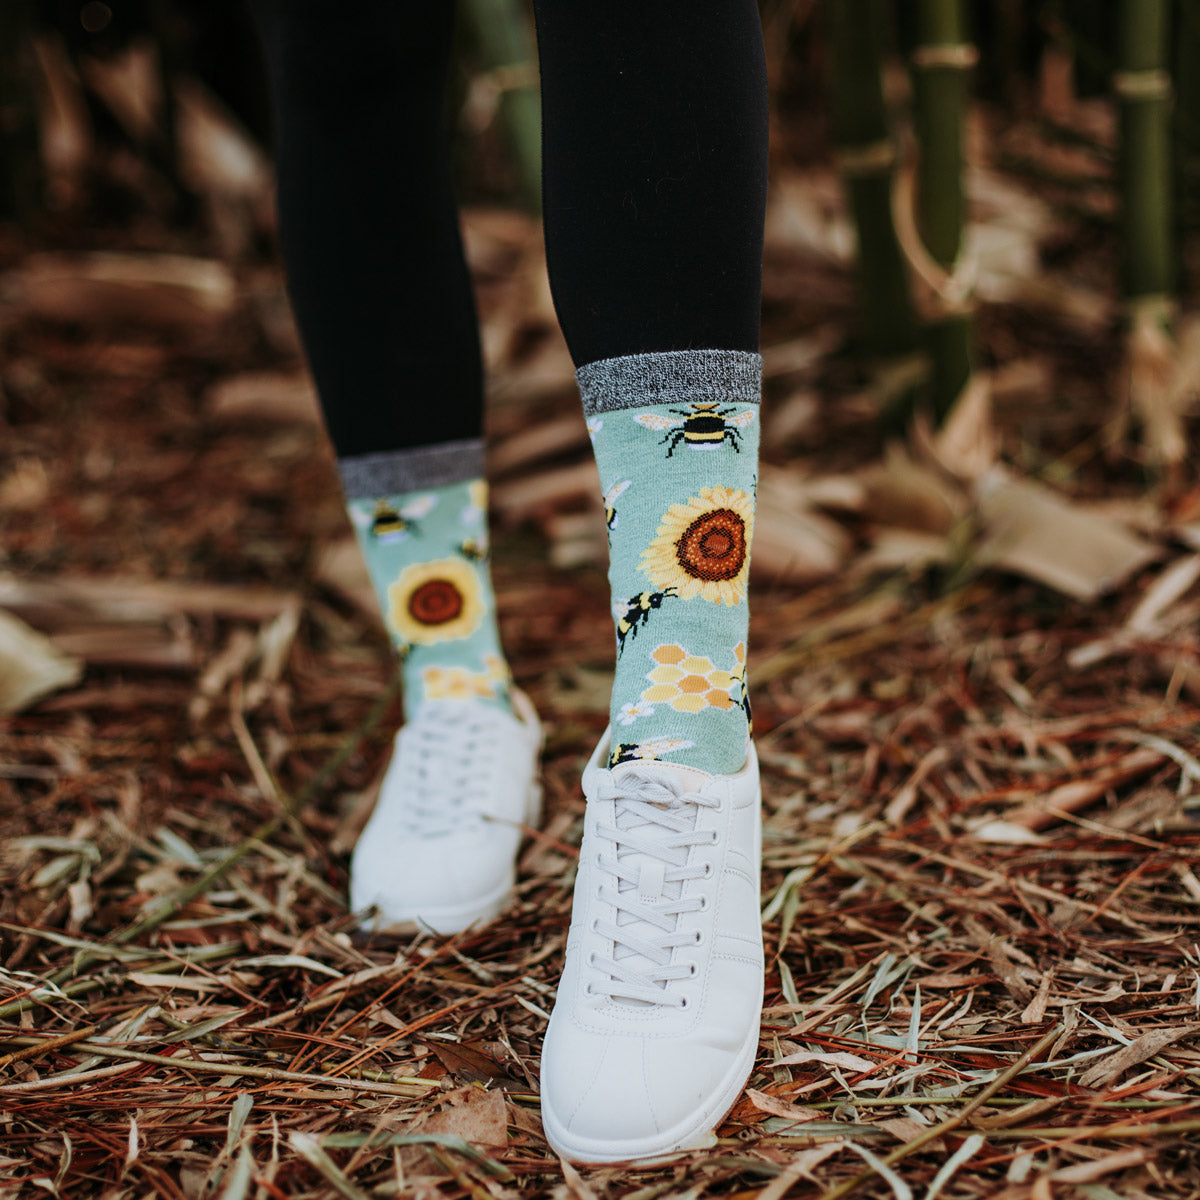 Bee and sunflower socks worn with white shoes and pulled over black leggings for an athleisure look